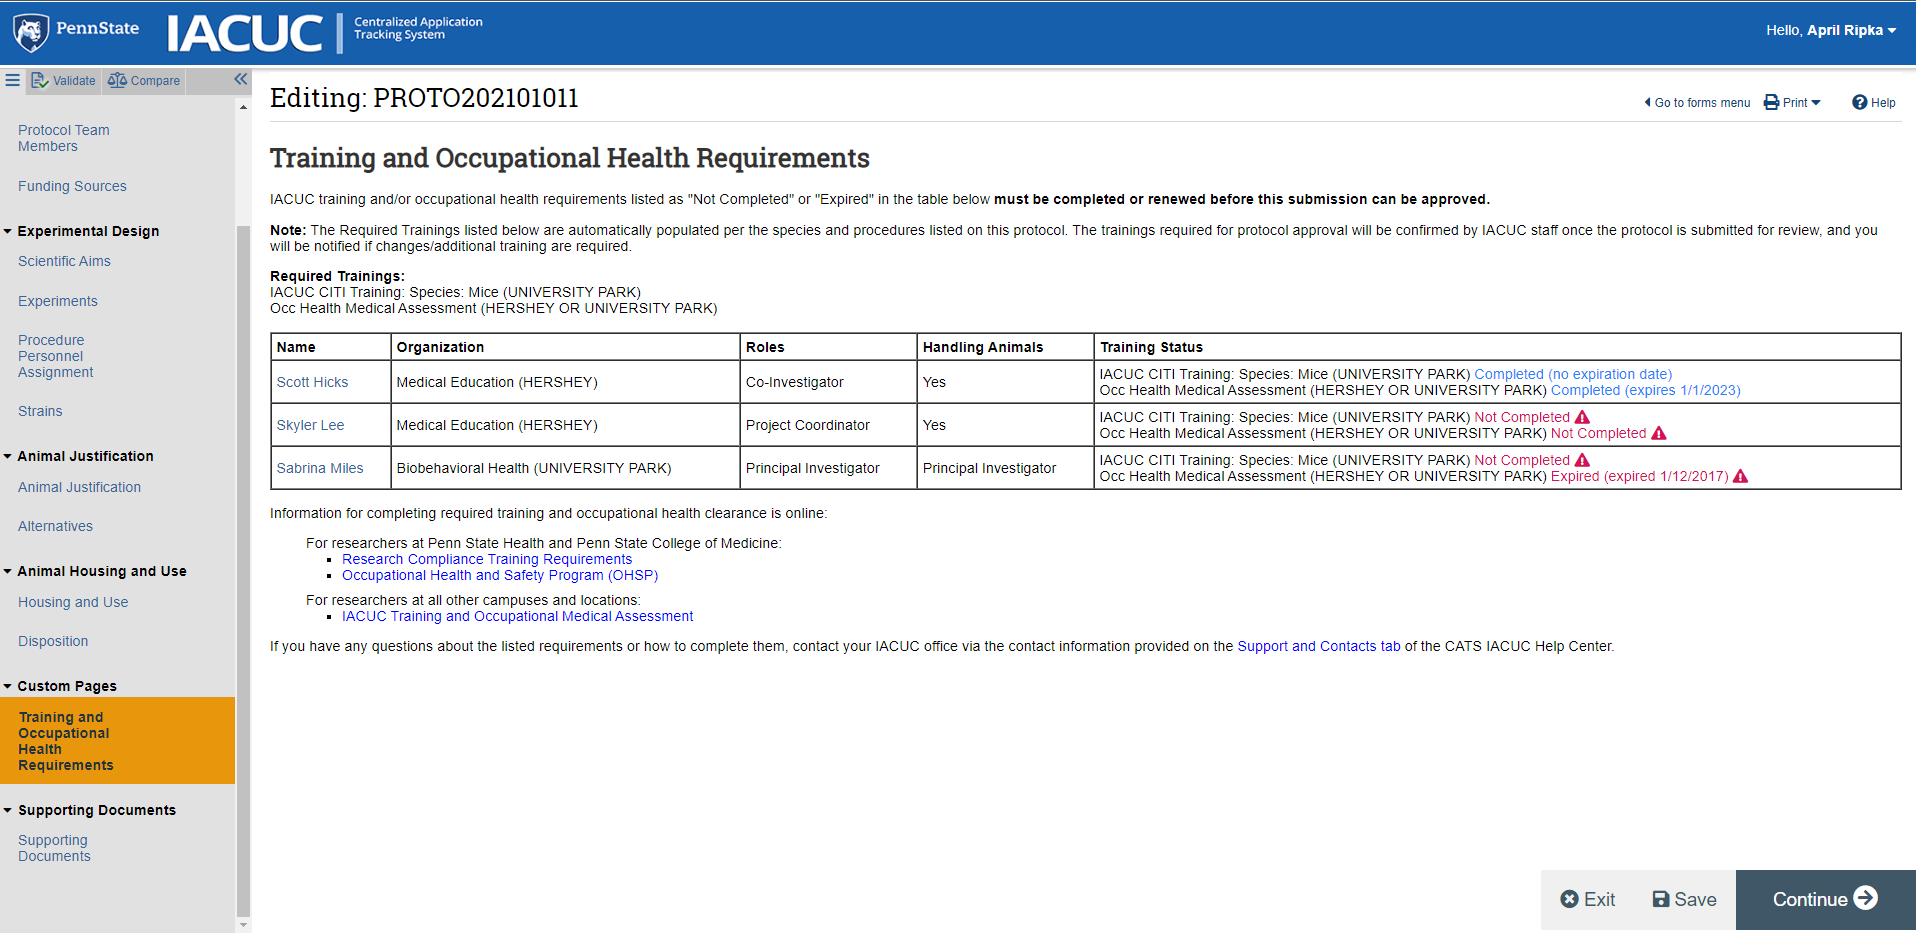 Training and Occupational Health Requirements Page Screenshot.png